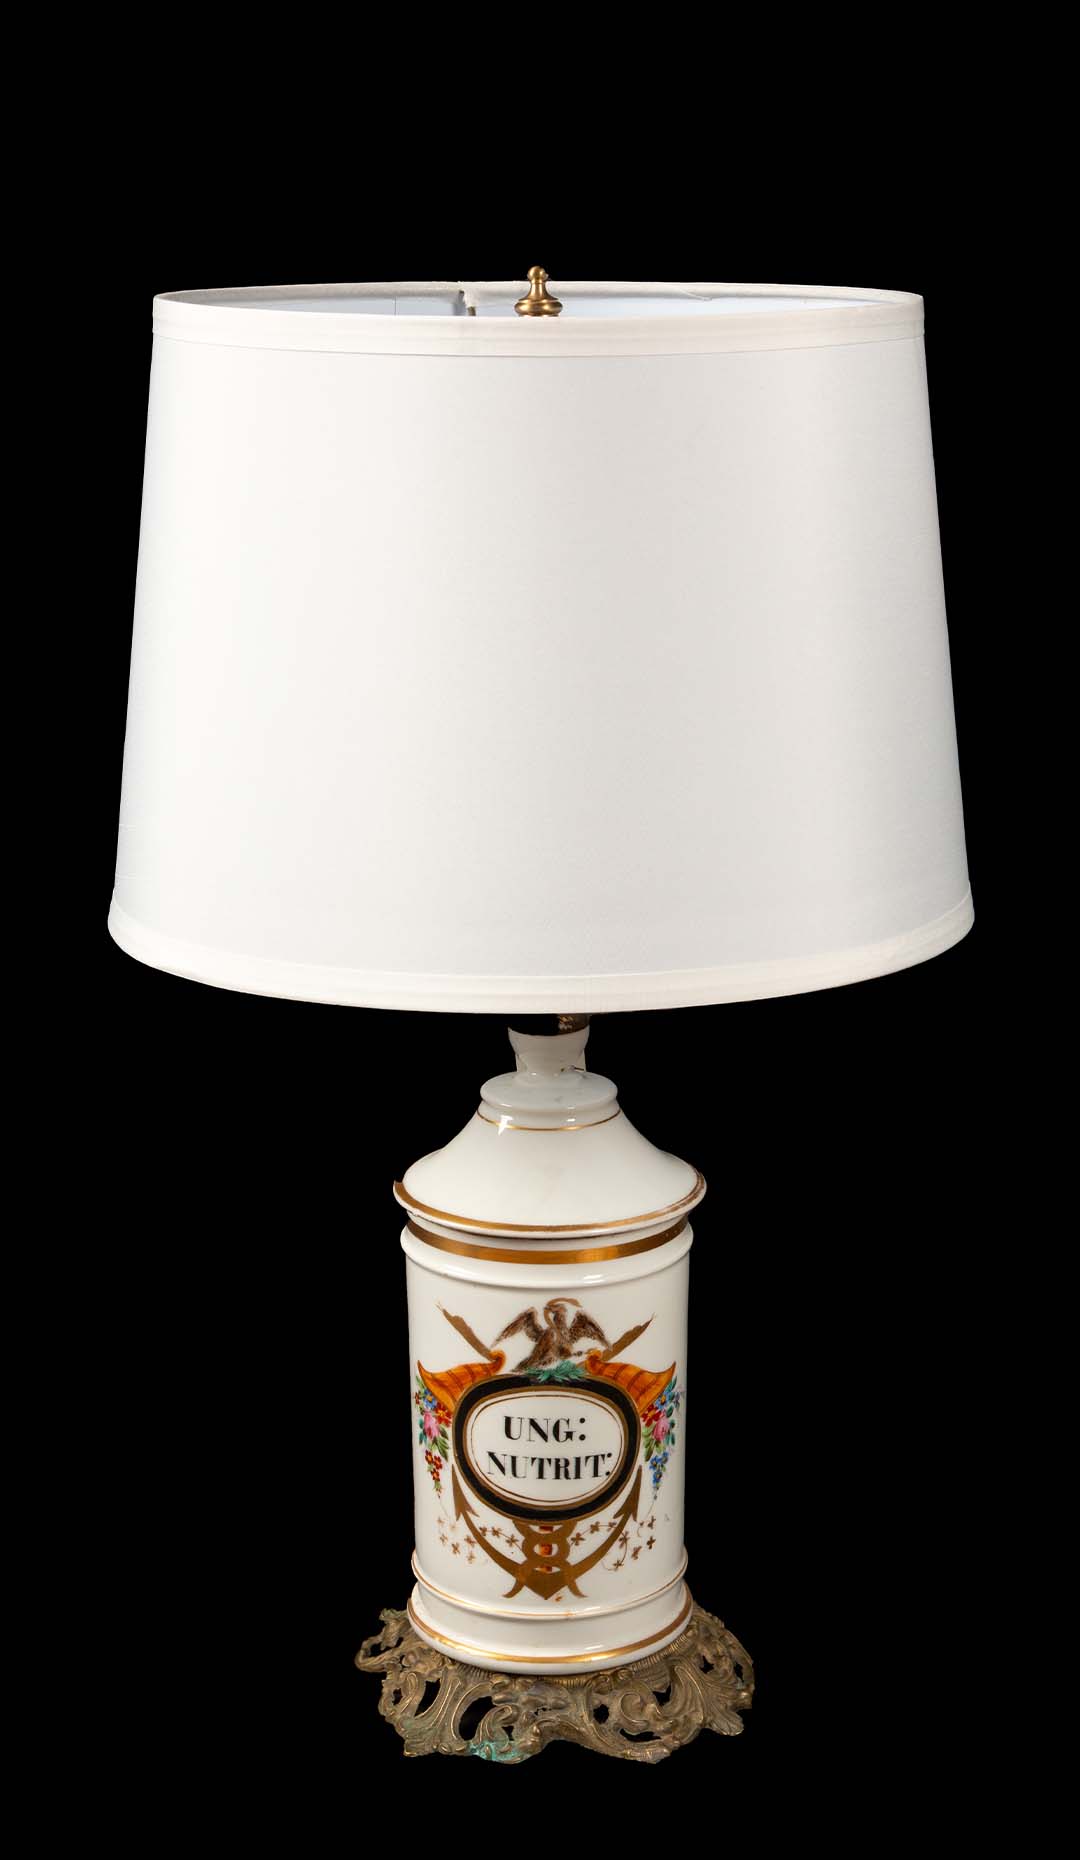 19th C. Apothecary Jar Mounted as a Lamp- 22.5H